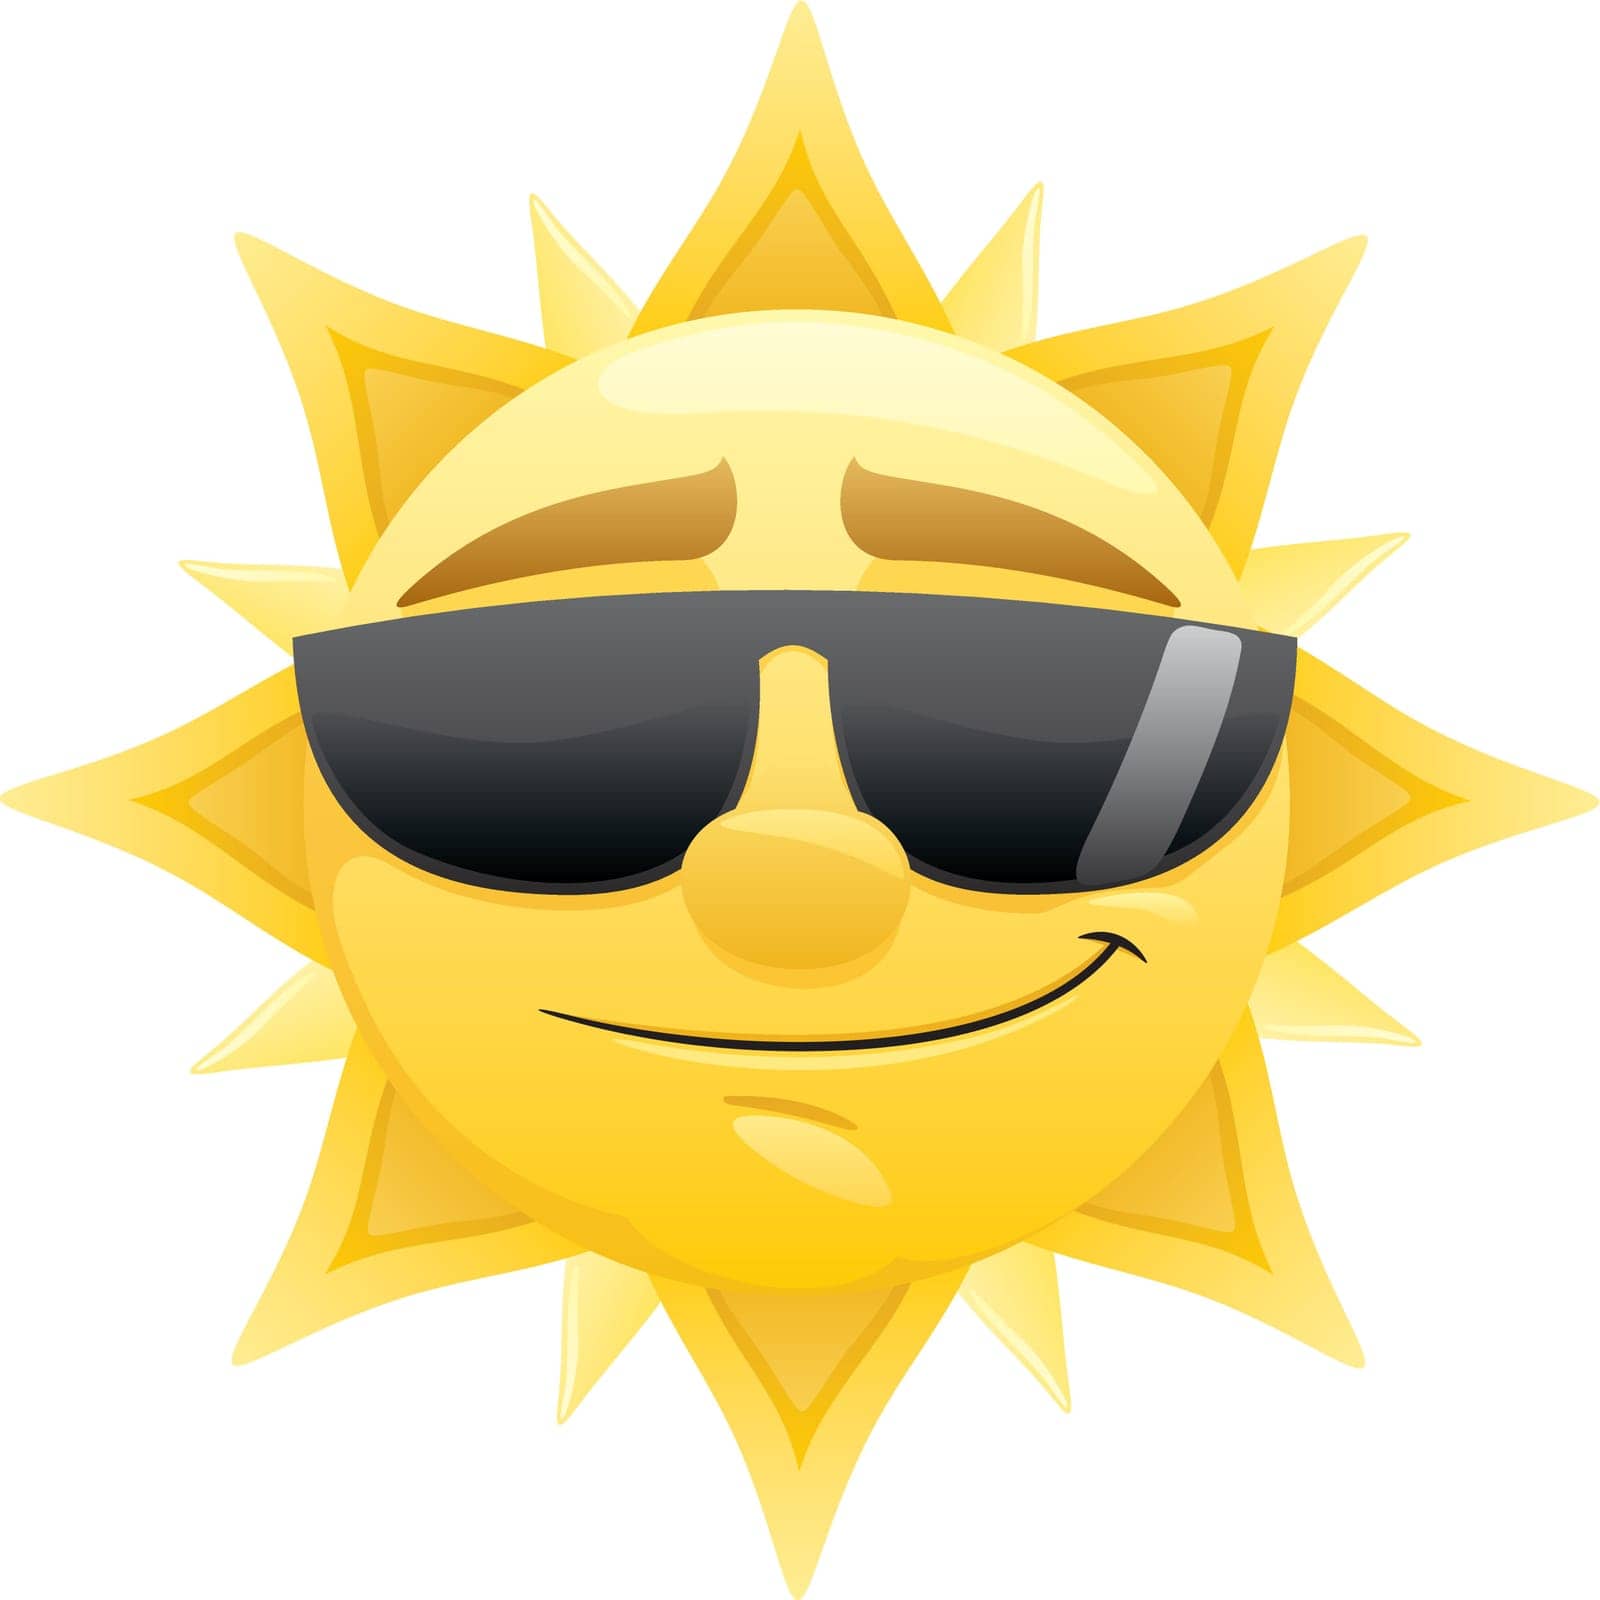 Smiling sun with sunglasses. 